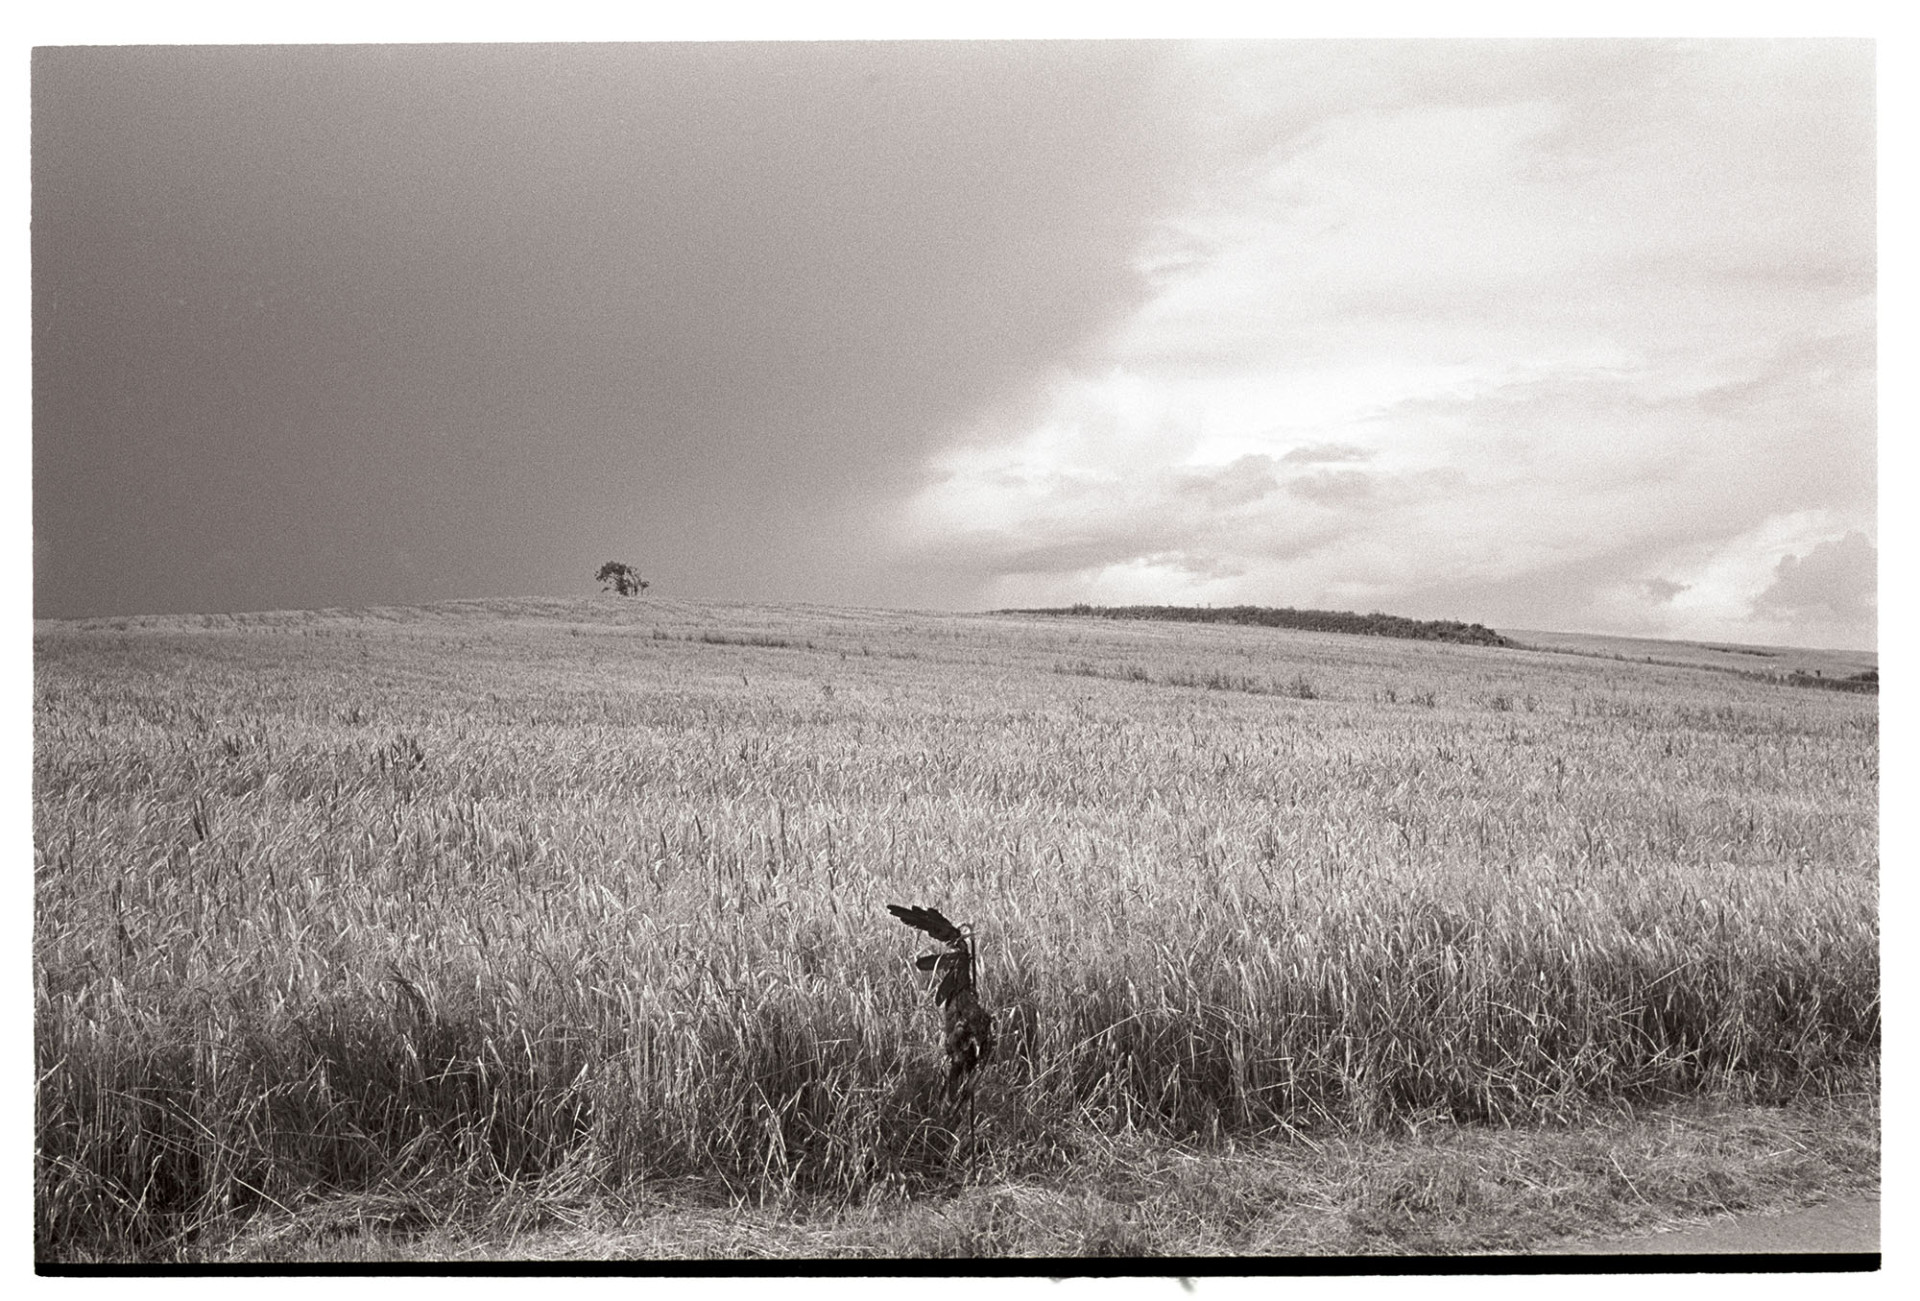 Field of barley with dead crow and threatening sky, clouds. 
[A field of barley under a cloud sky at Brimblecombe, Dowland. A dead crow is stuck on a metal stake in the ground, possibly to scare off other birds from the crop.]